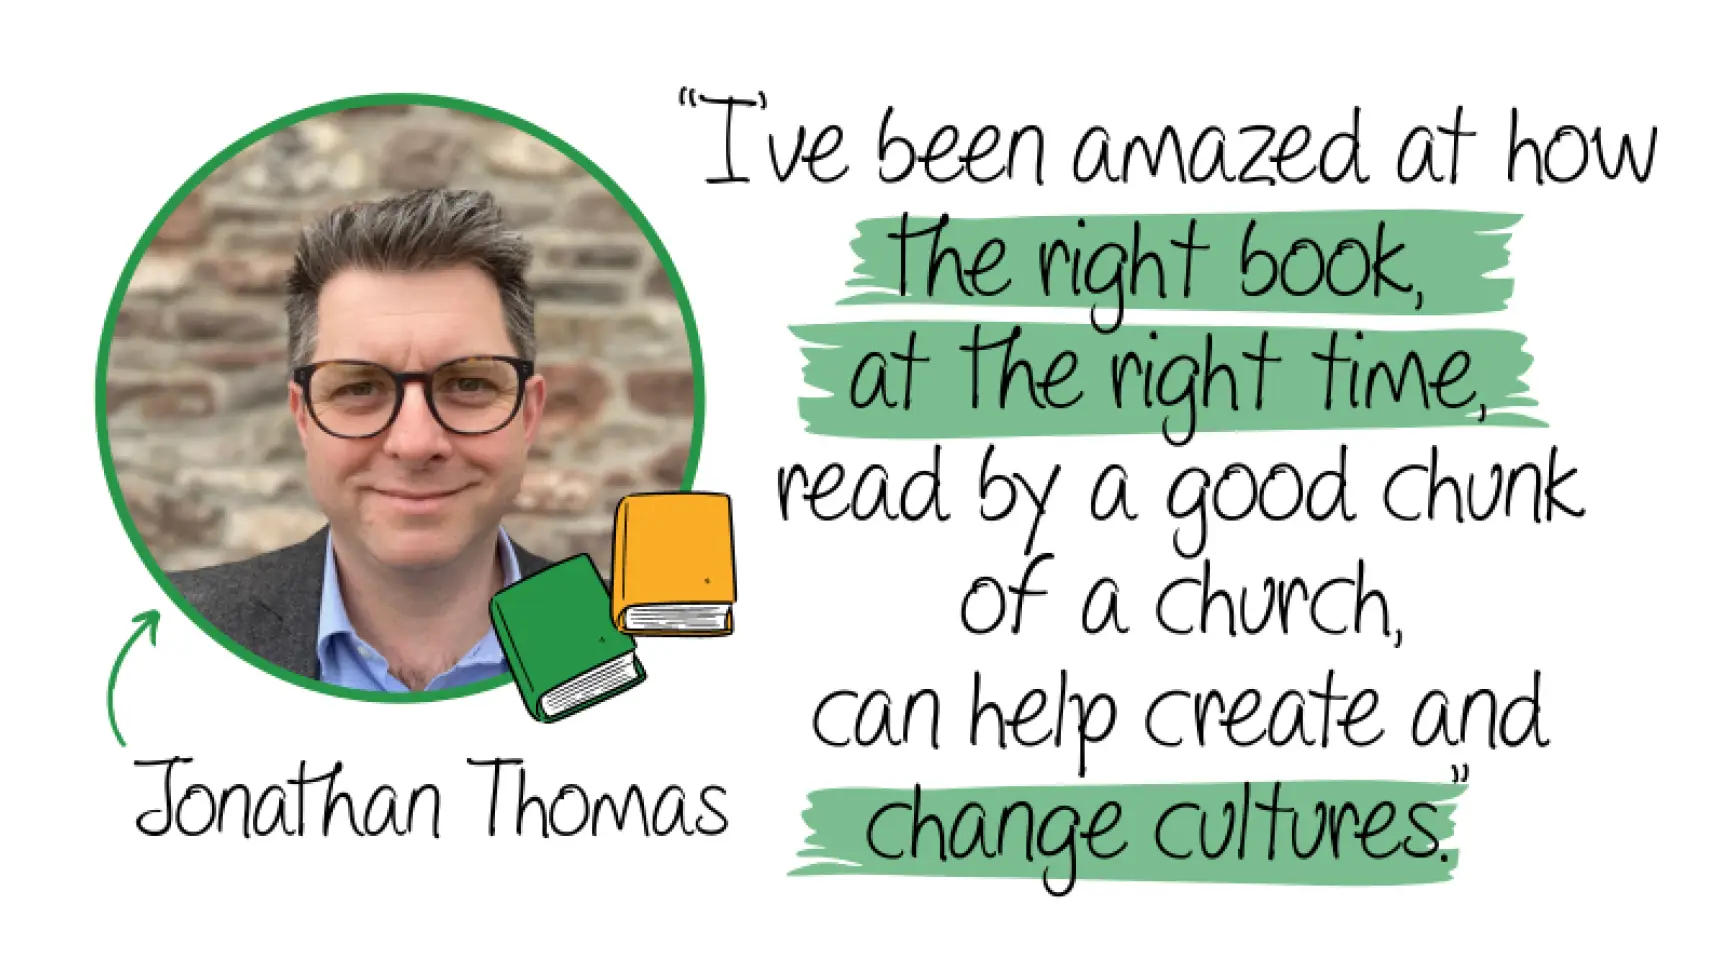 encouraging-reading-jonathan-thomas-quote-1721221830.png